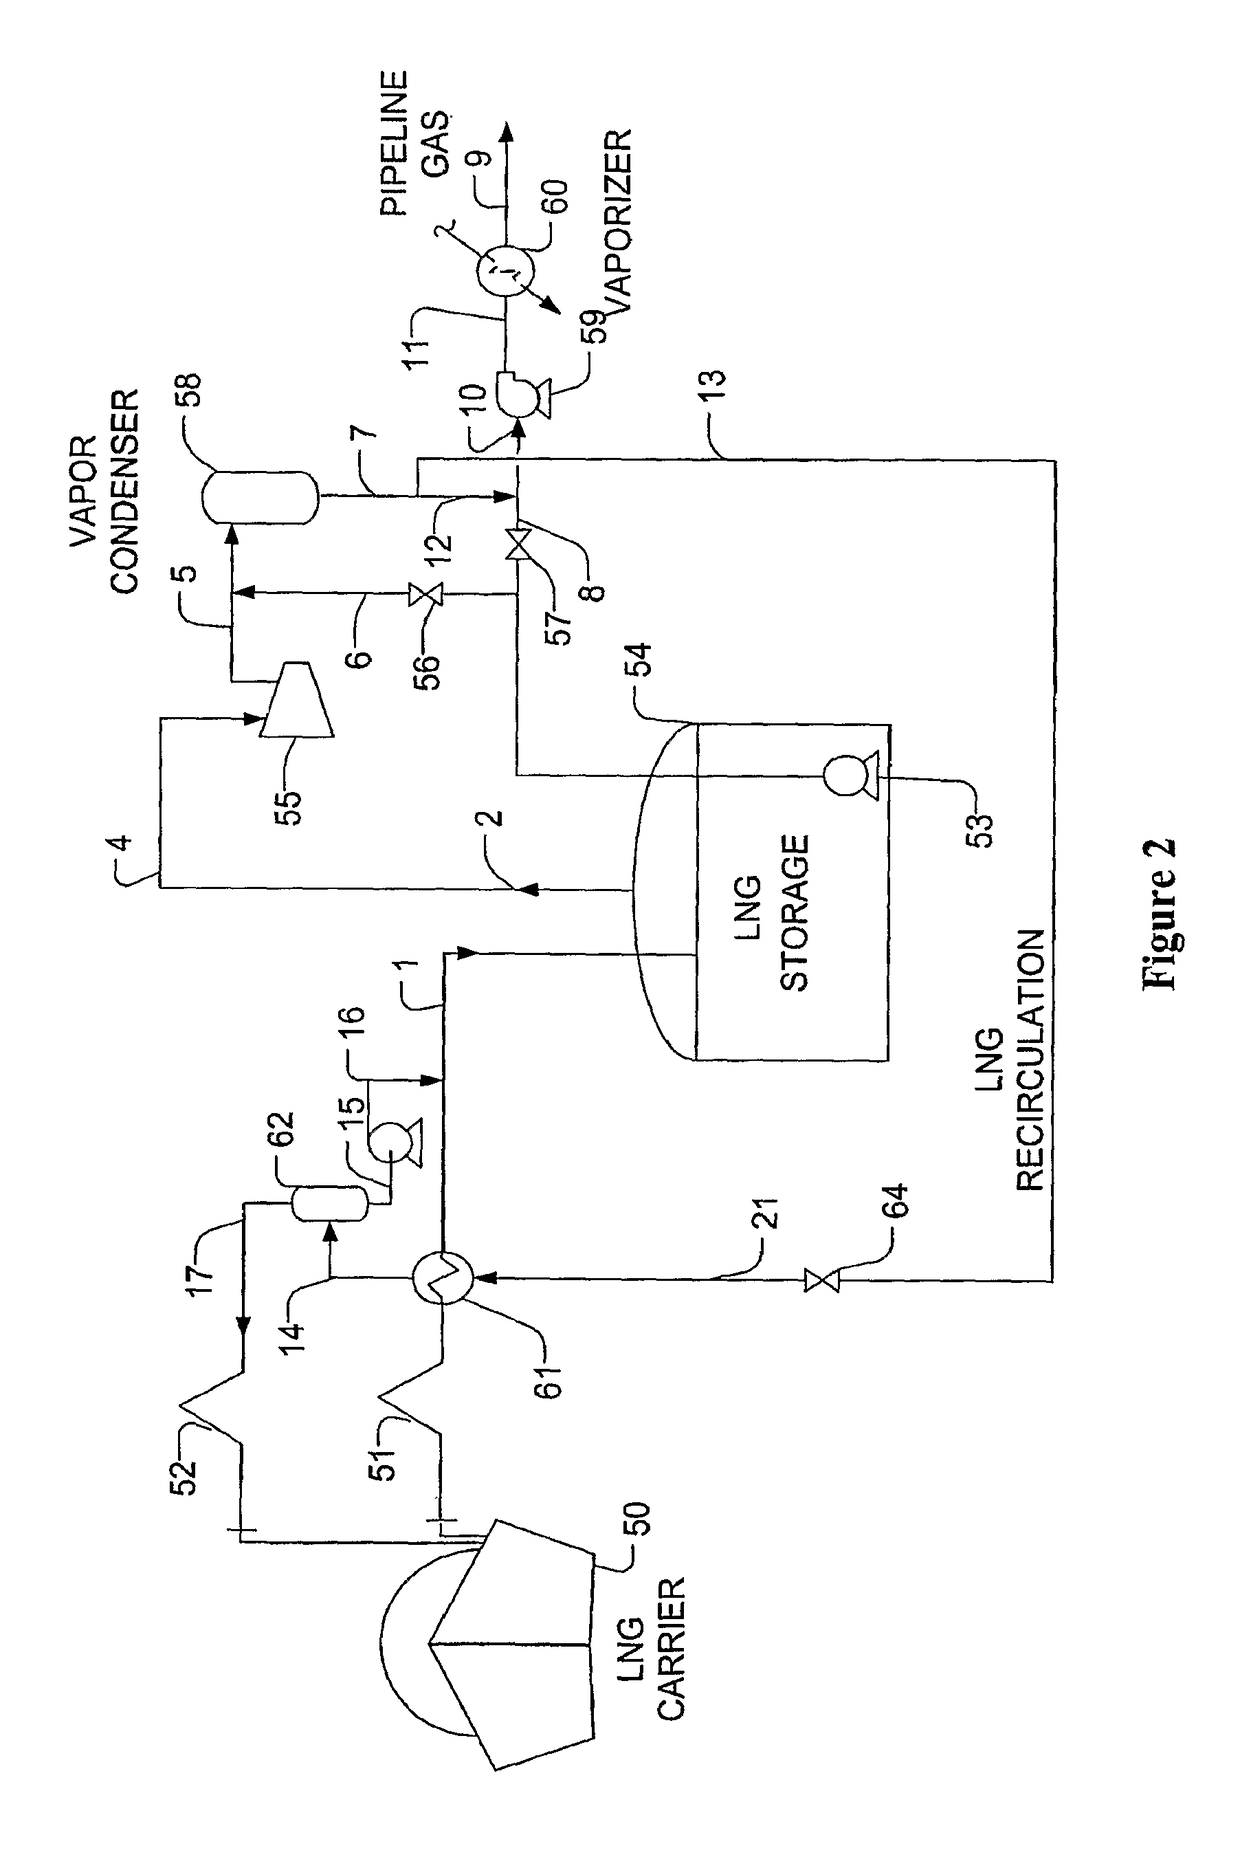 LNG vapor handling configurations and methods